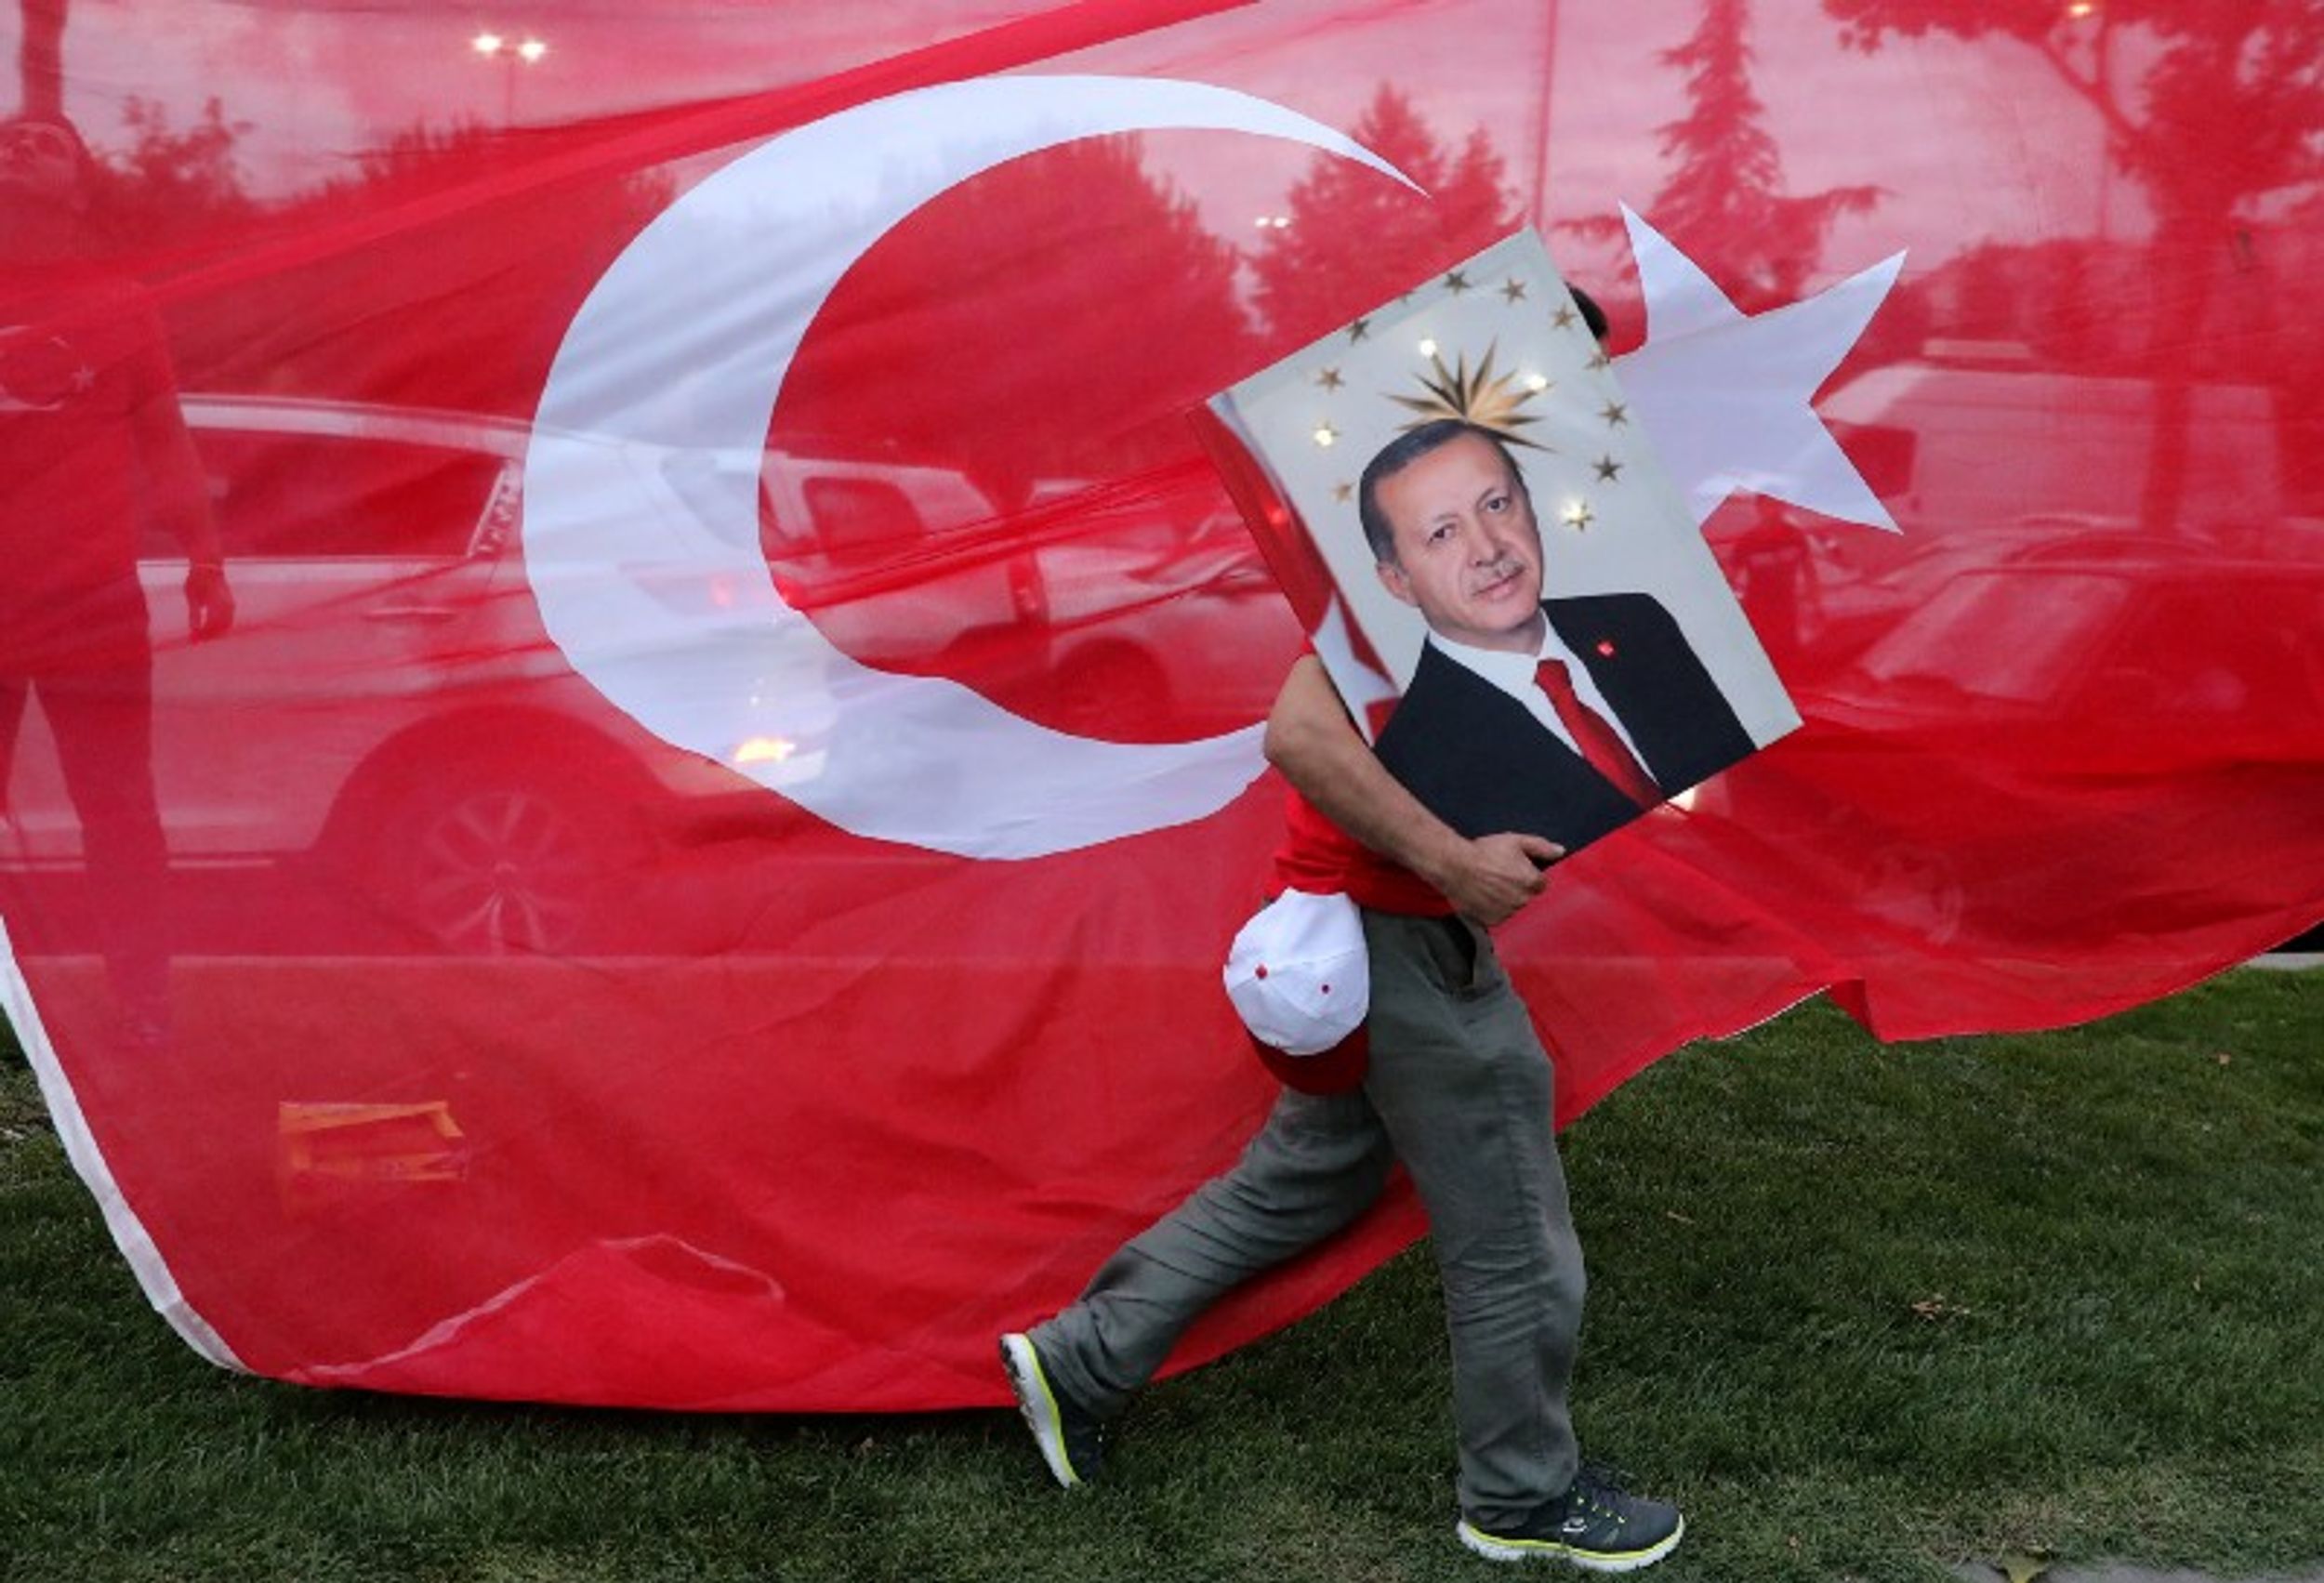 TURKEY: THE BACKSTAGE TROUBLES OF A ONE-MAN SHOW